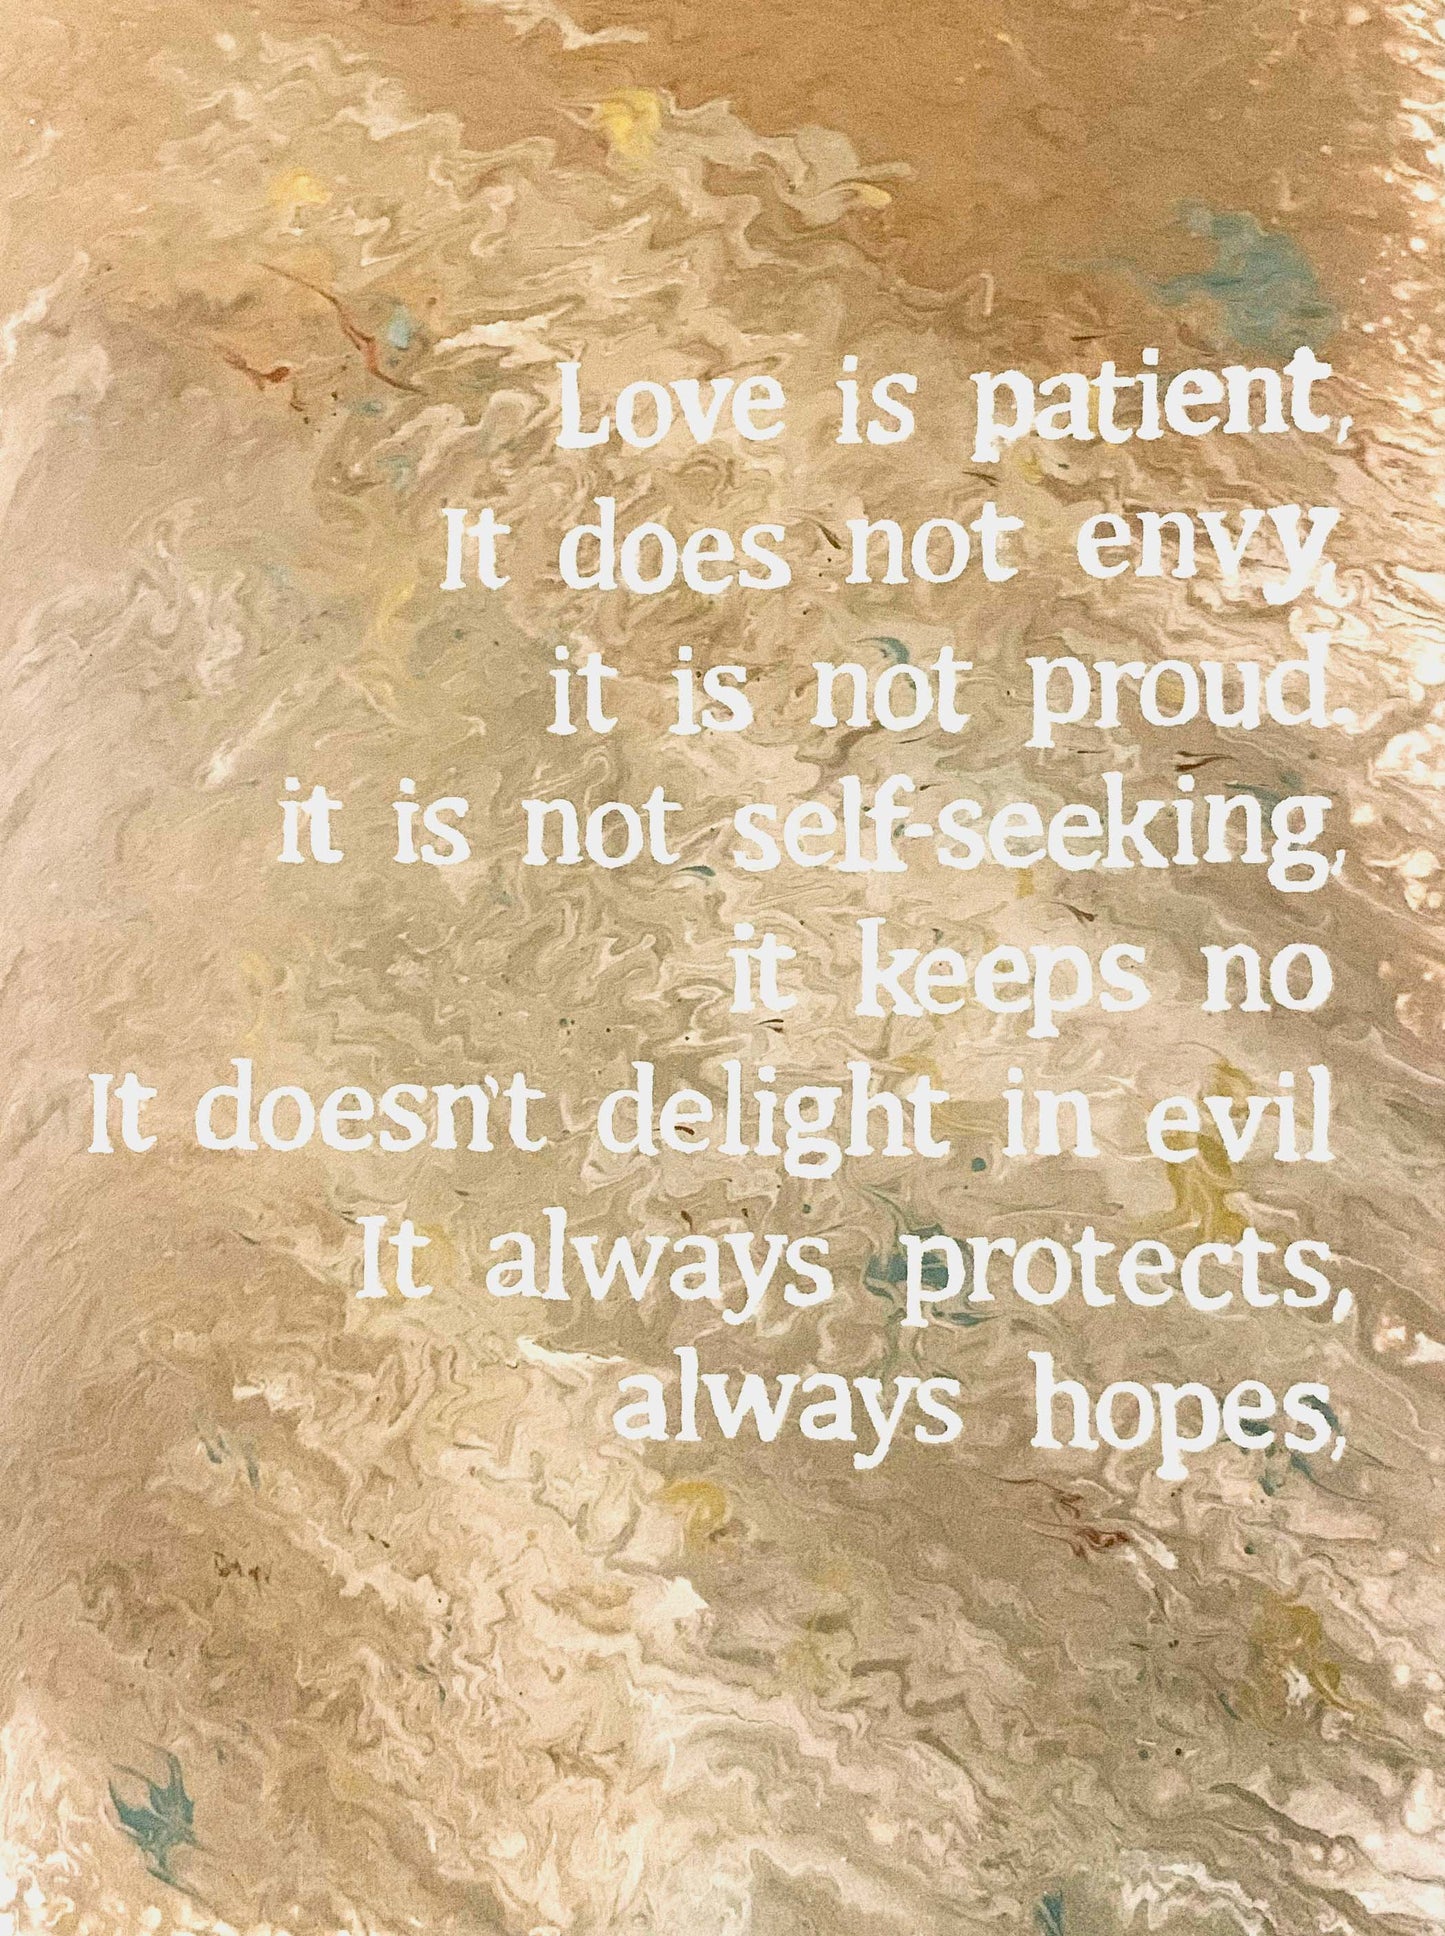 Love is Patient, Original Painting, Abstract Acrylic on canvas 2 Panel 36” x 24”